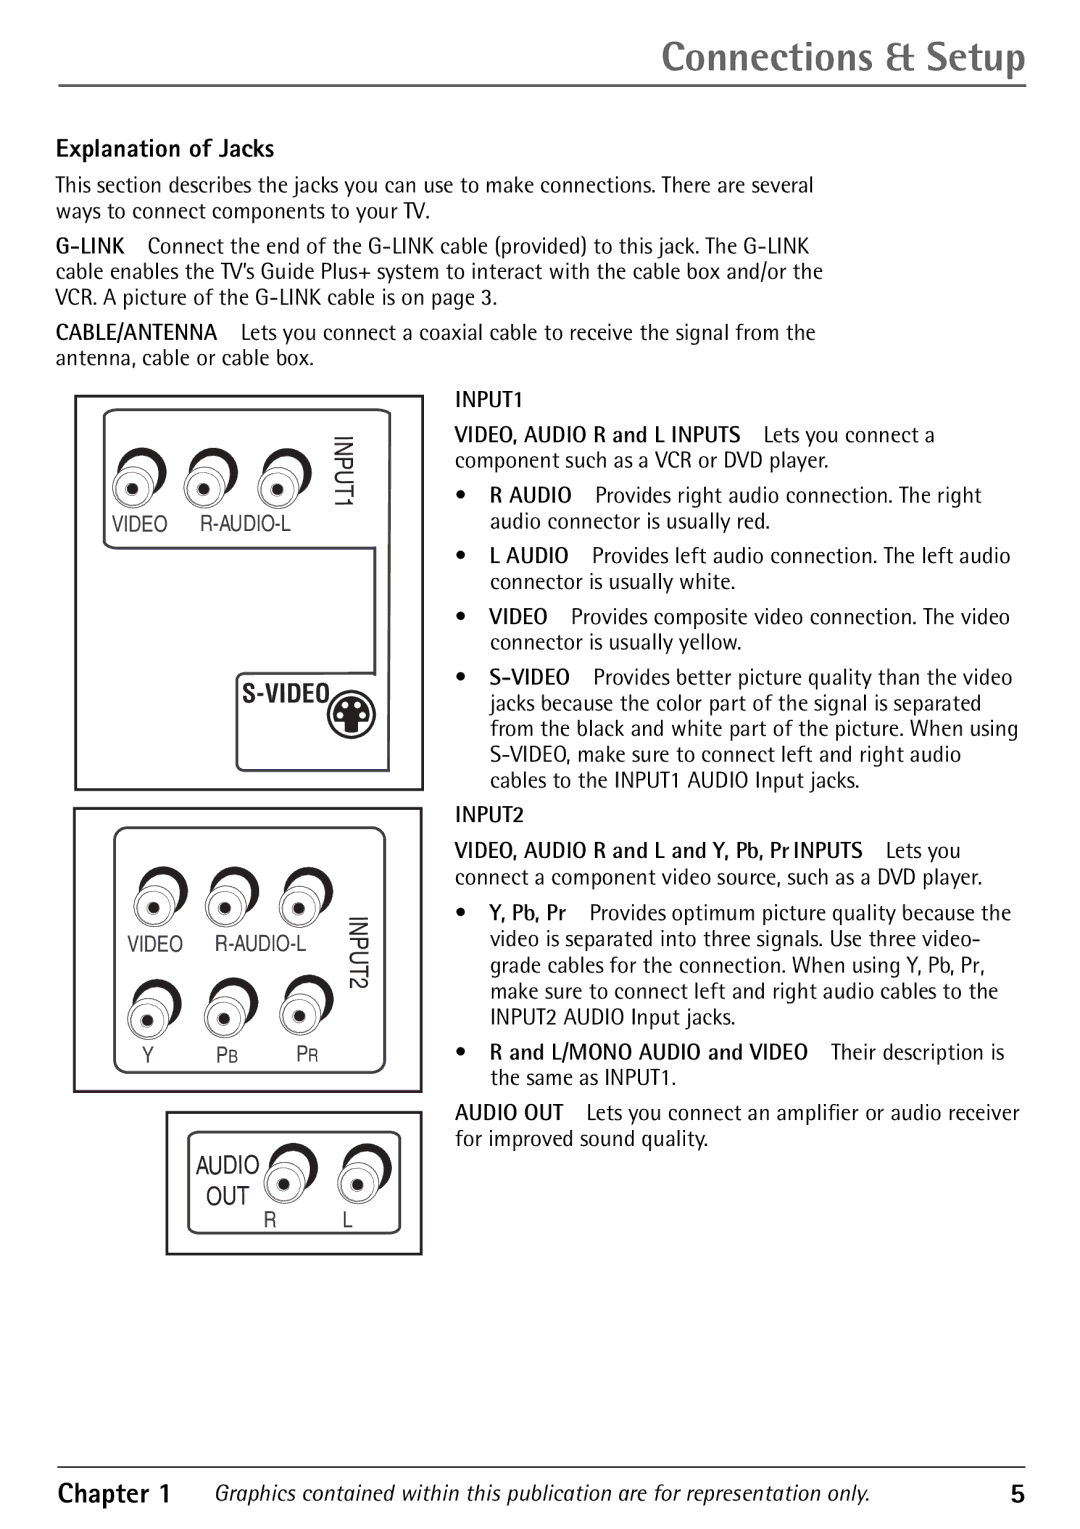 RCA 32F530T manual Explanation of Jacks, ¥ R and L/MONO Audio and Video Their description is, Same as INPUT1 